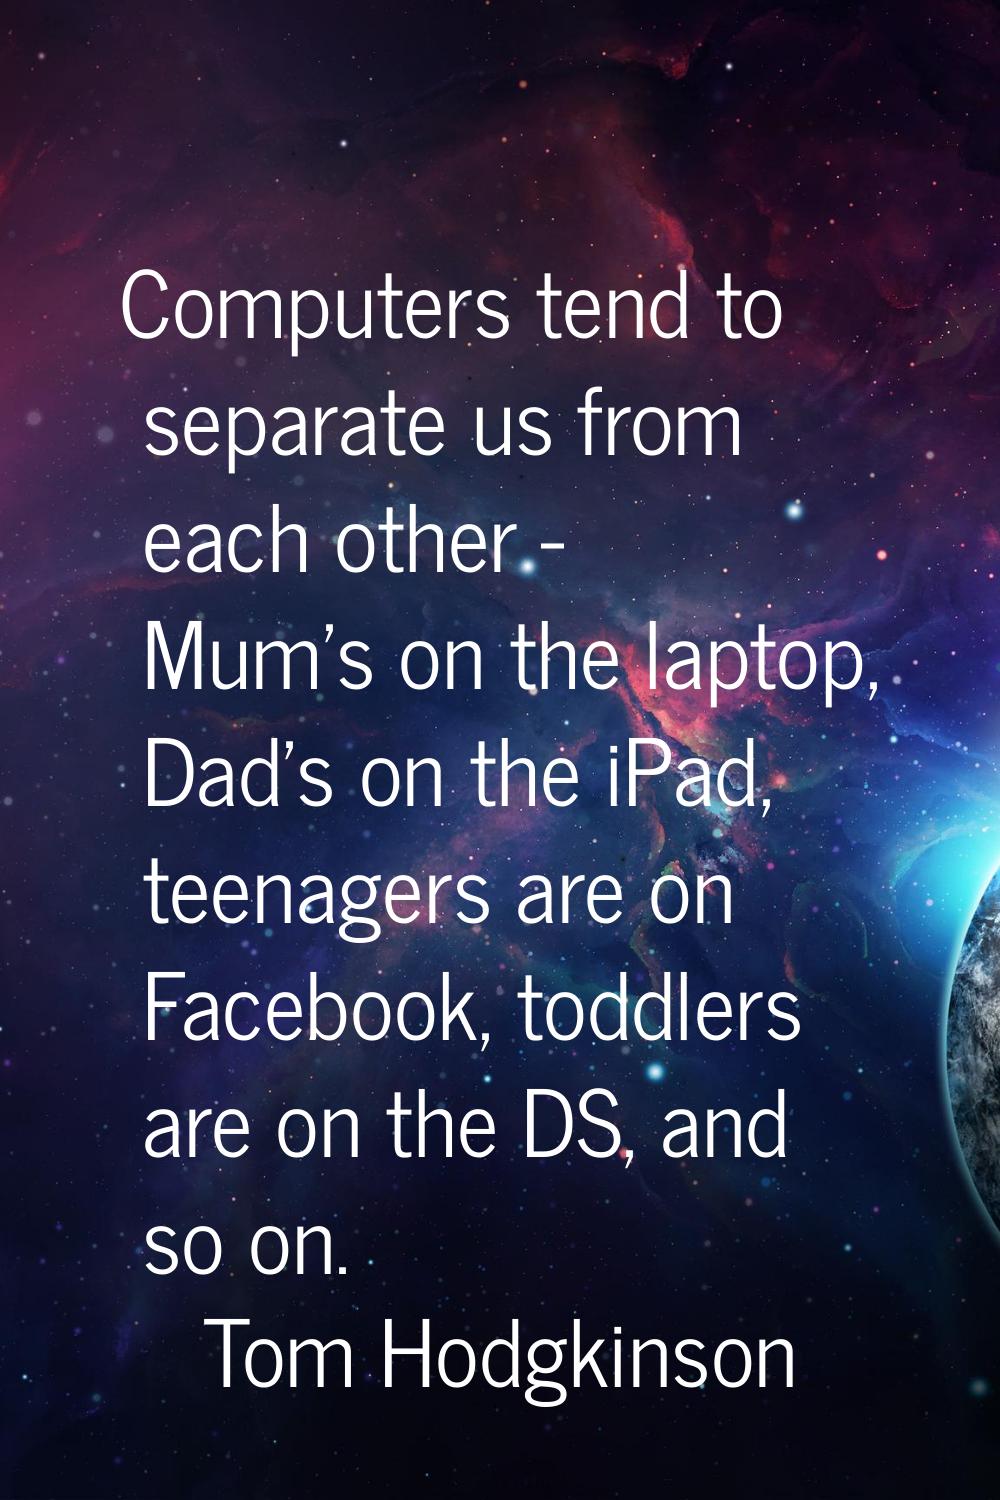 Computers tend to separate us from each other - Mum's on the laptop, Dad's on the iPad, teenagers a